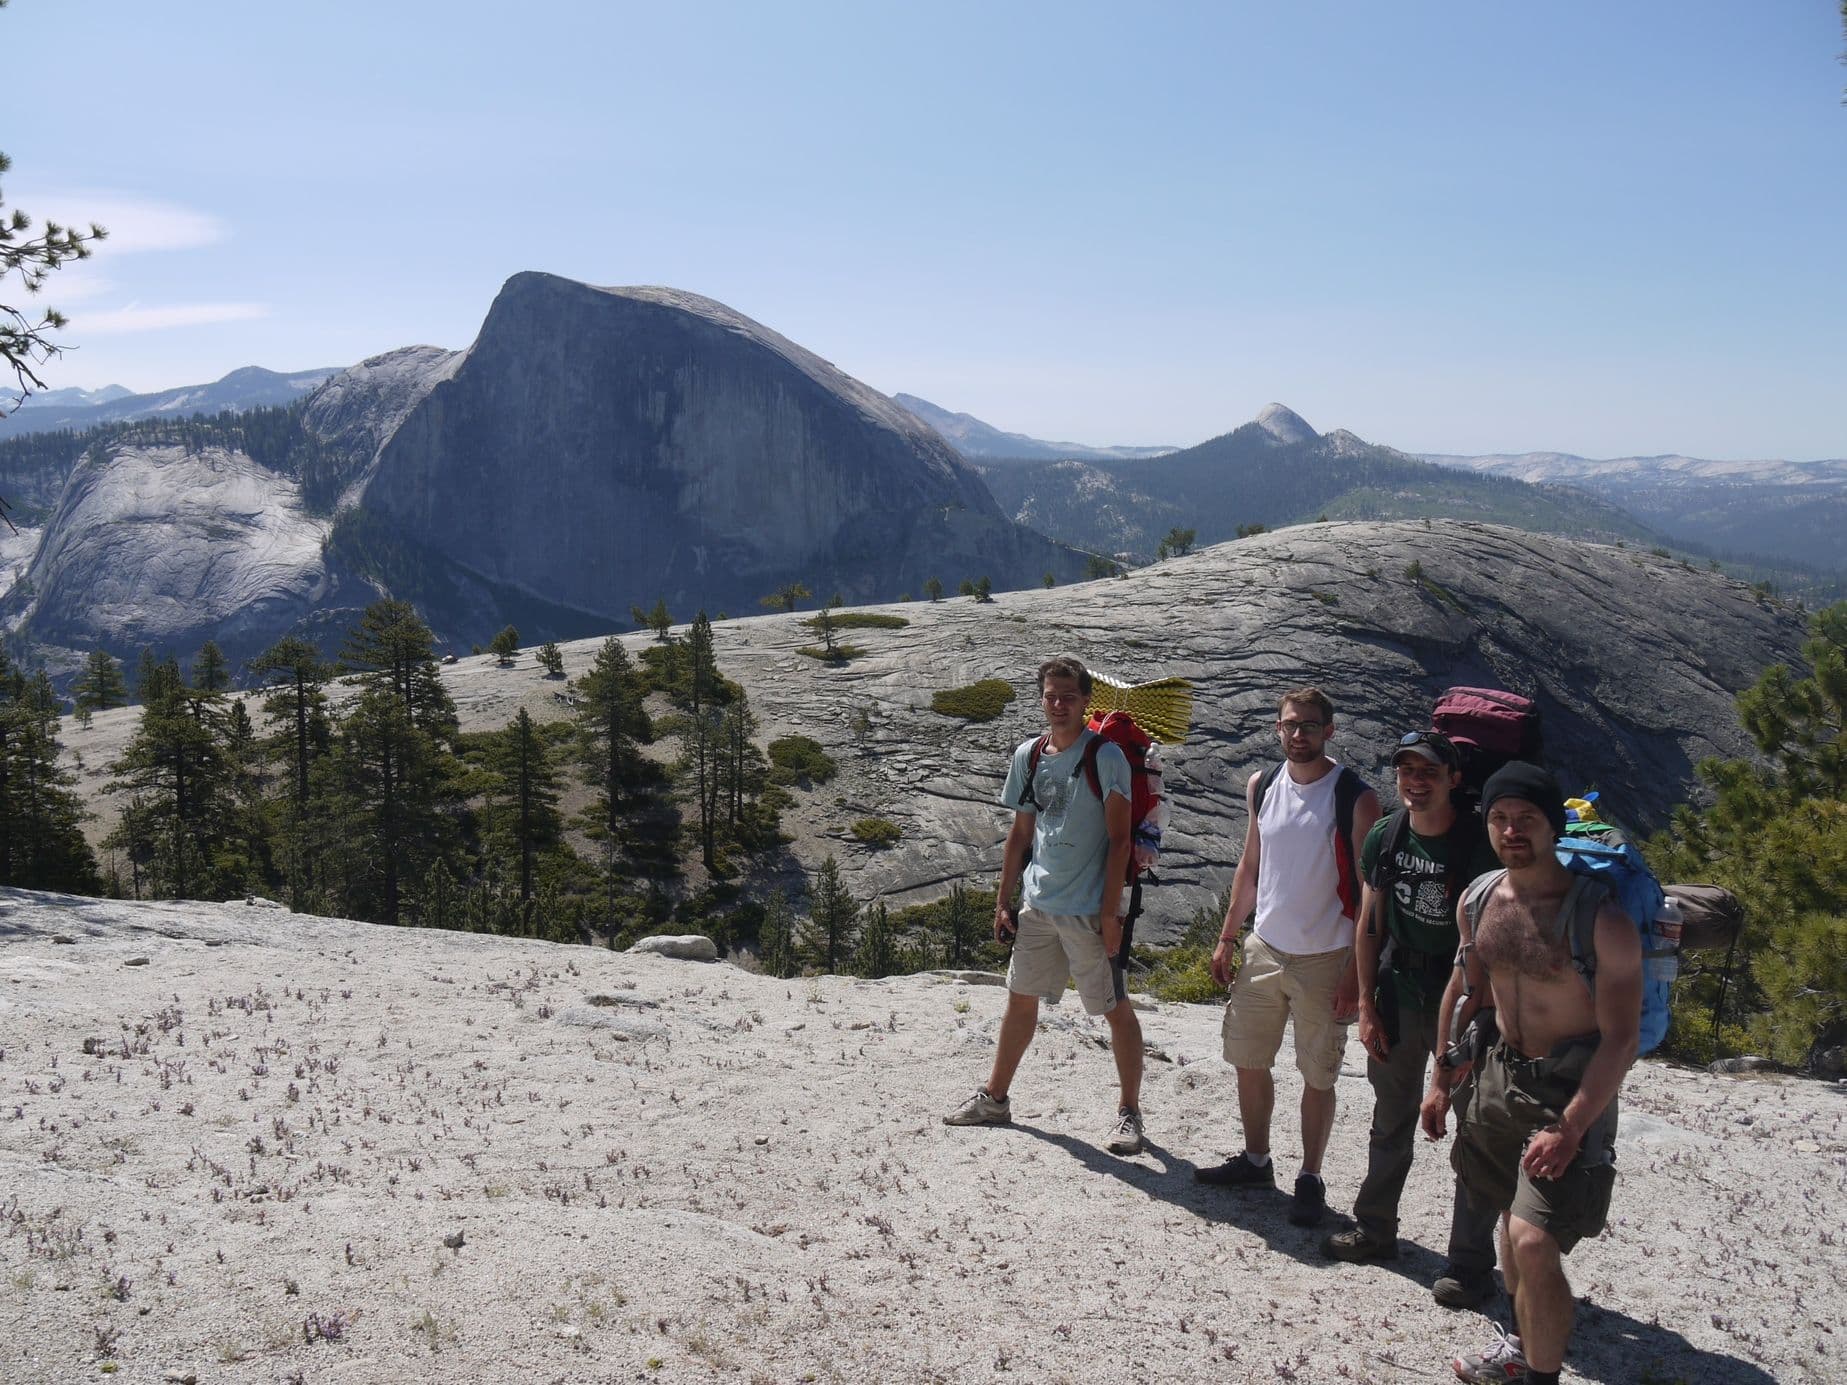 The hikers on top of Indian Ridge, overlooking North Dome